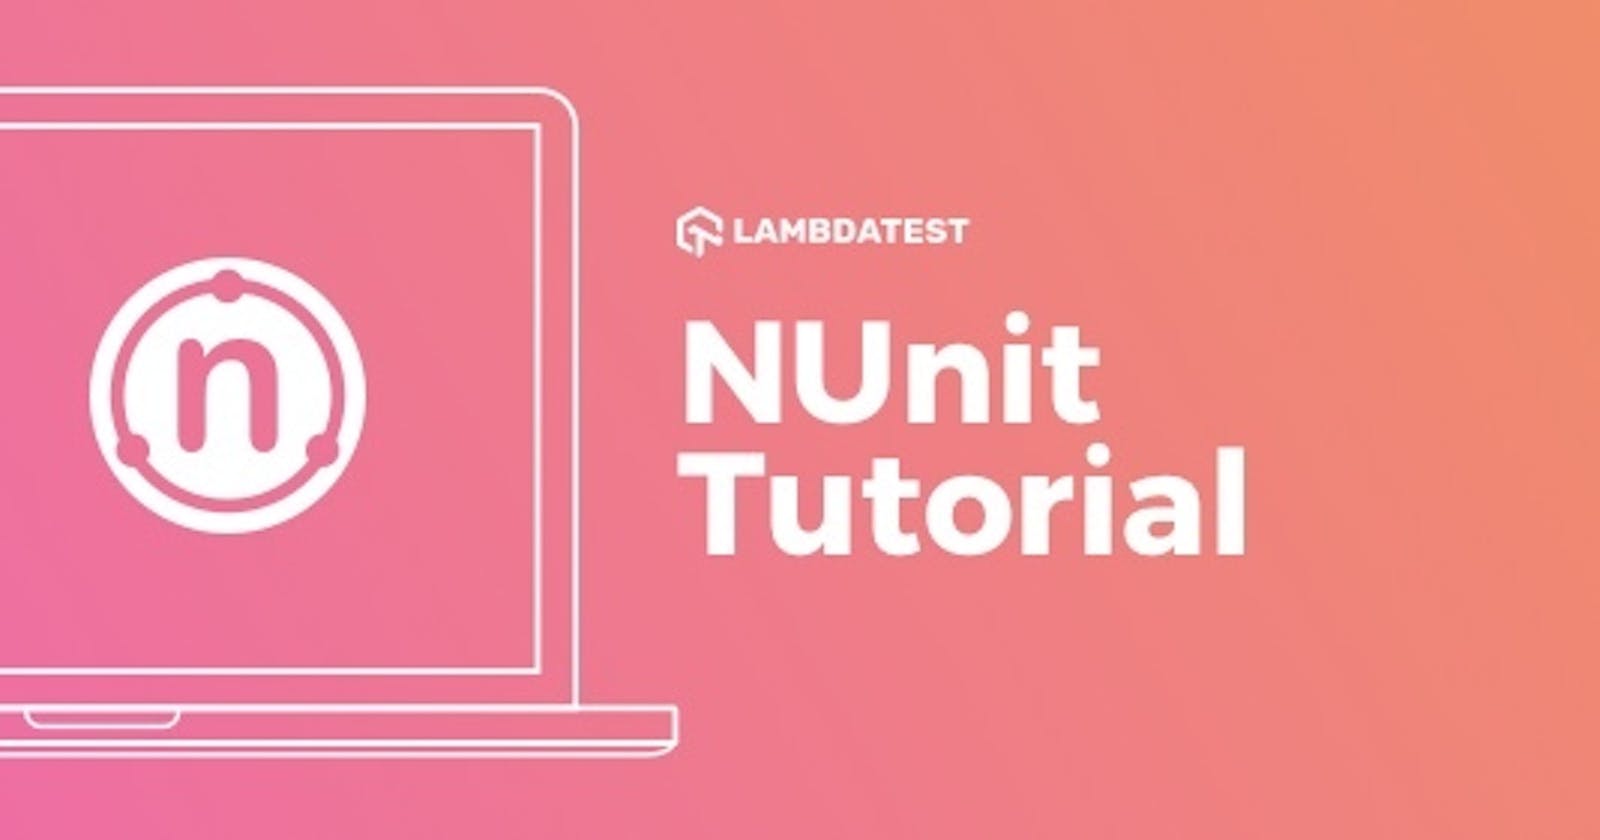 NUnit Tutorial: A Complete Guide With Examples and Best Practices